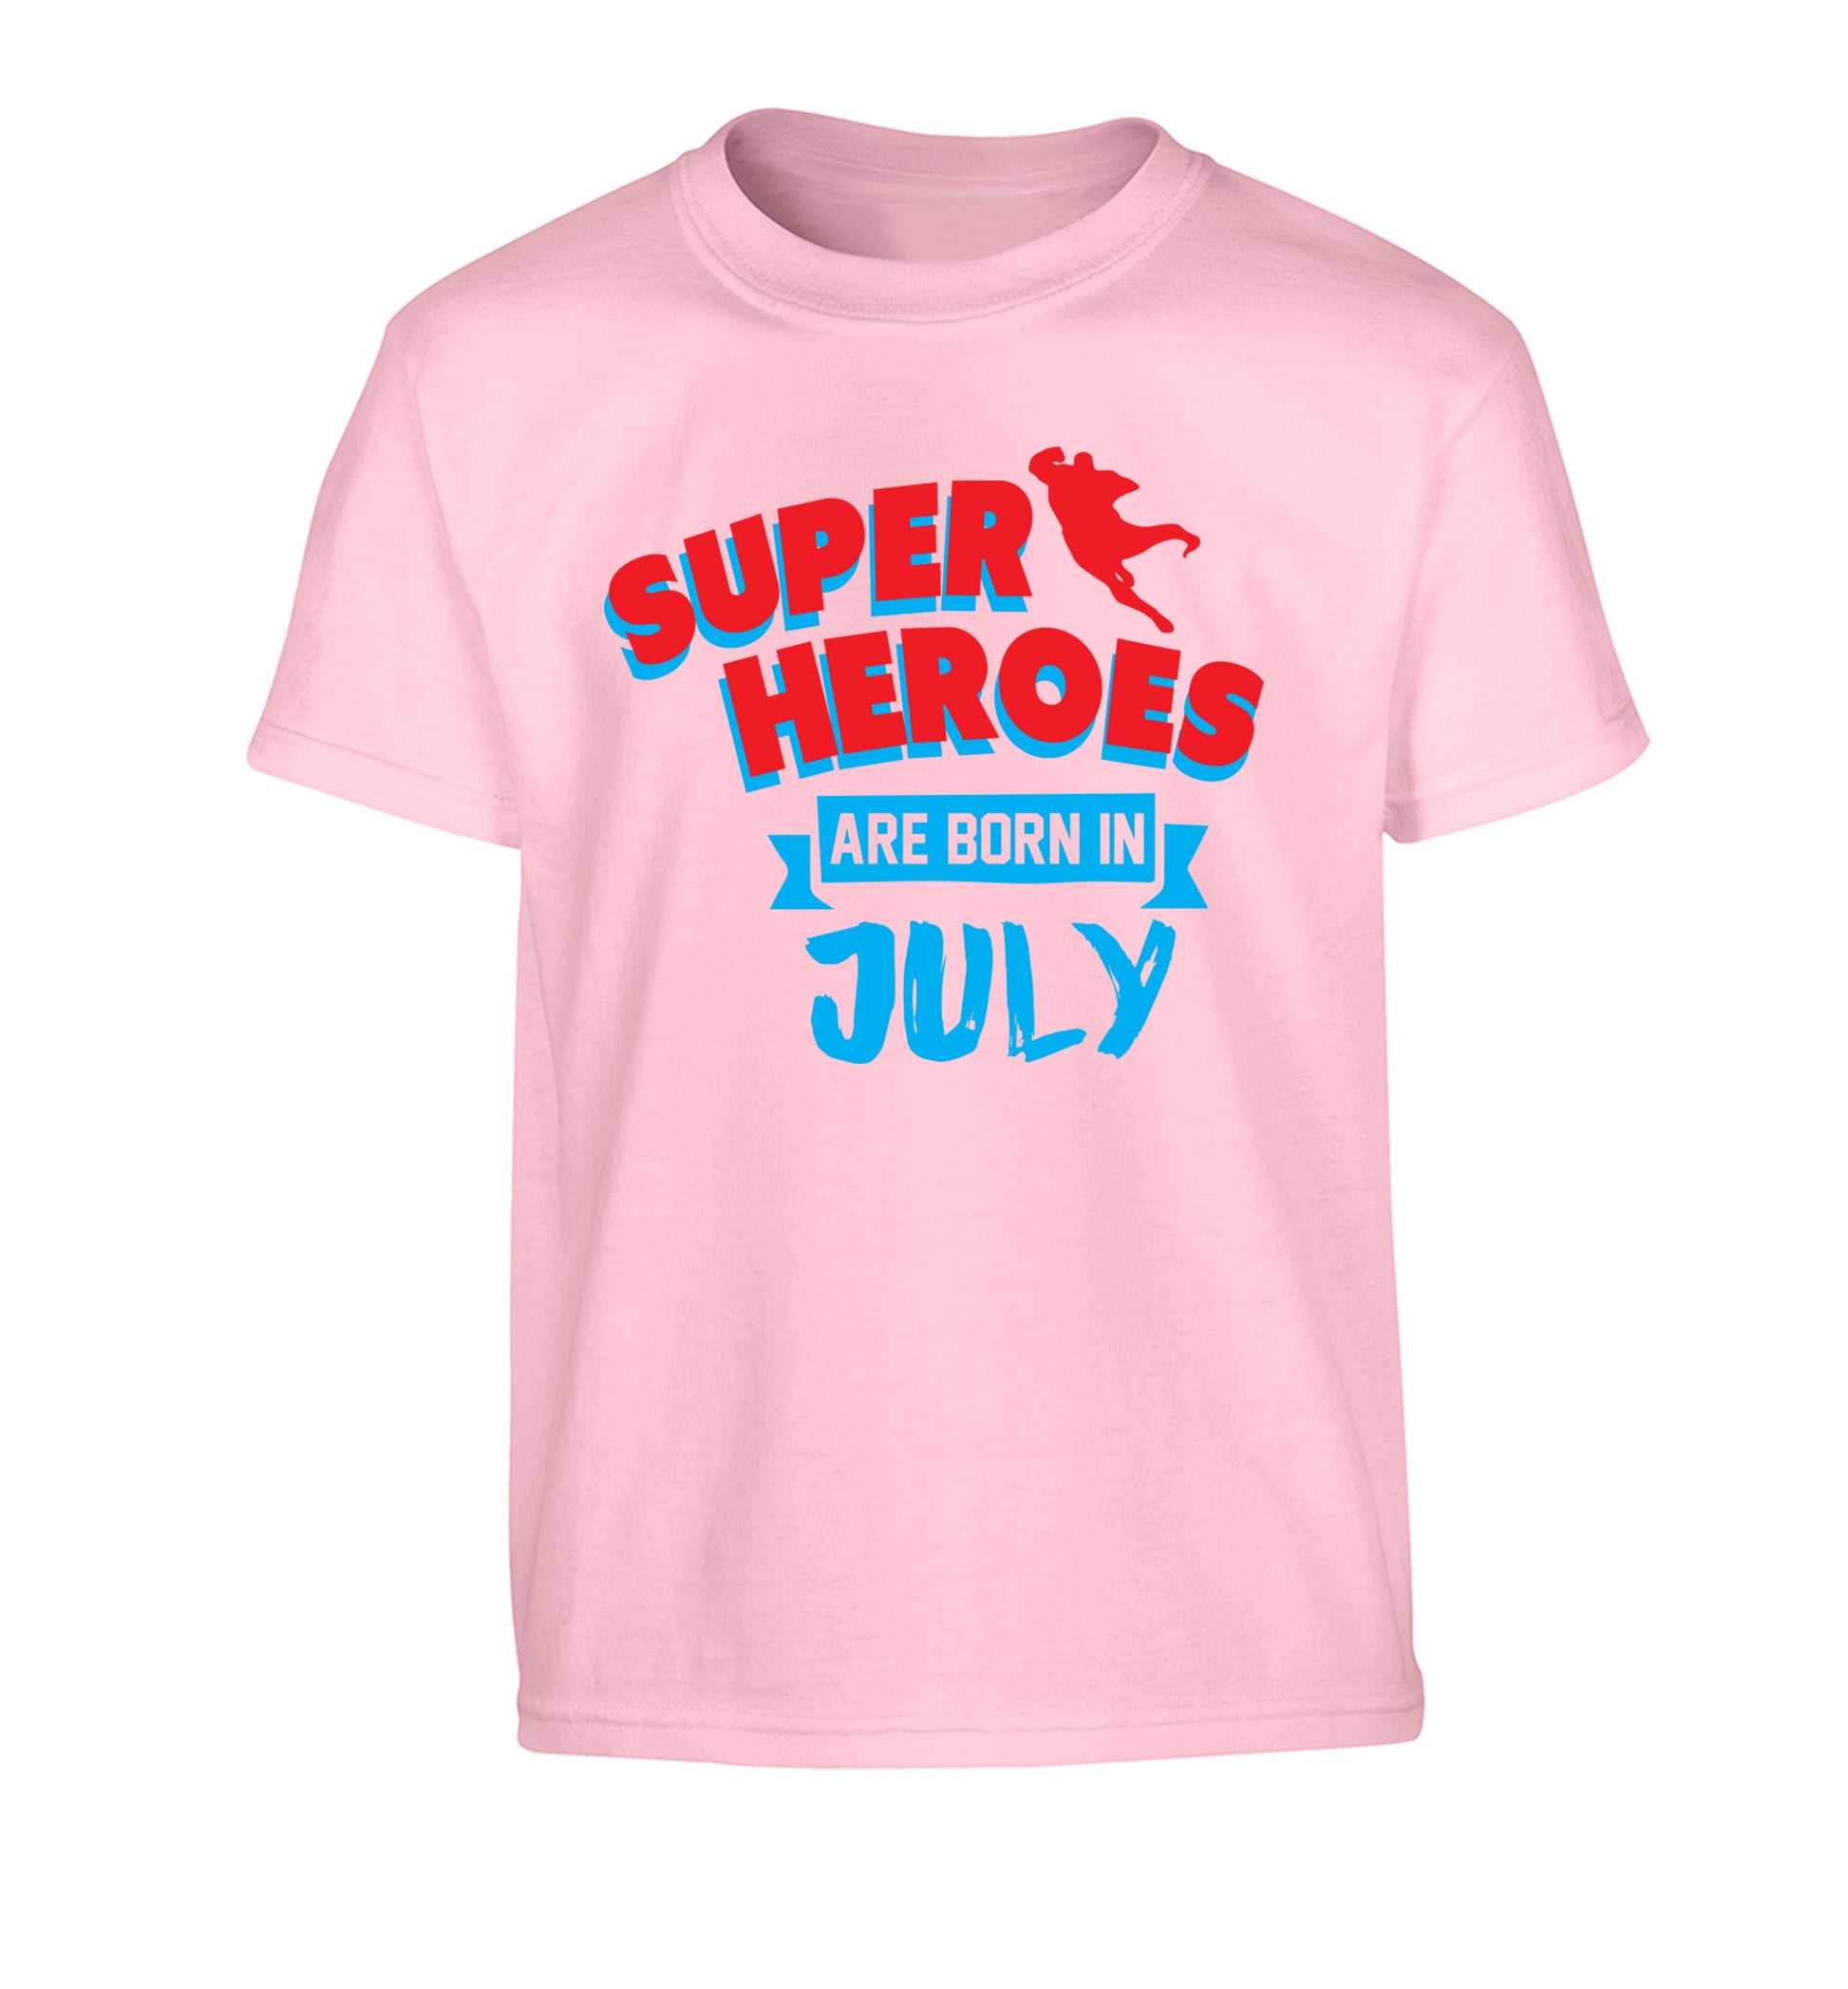 Superheroes are born in July Children's light pink Tshirt 12-13 Years